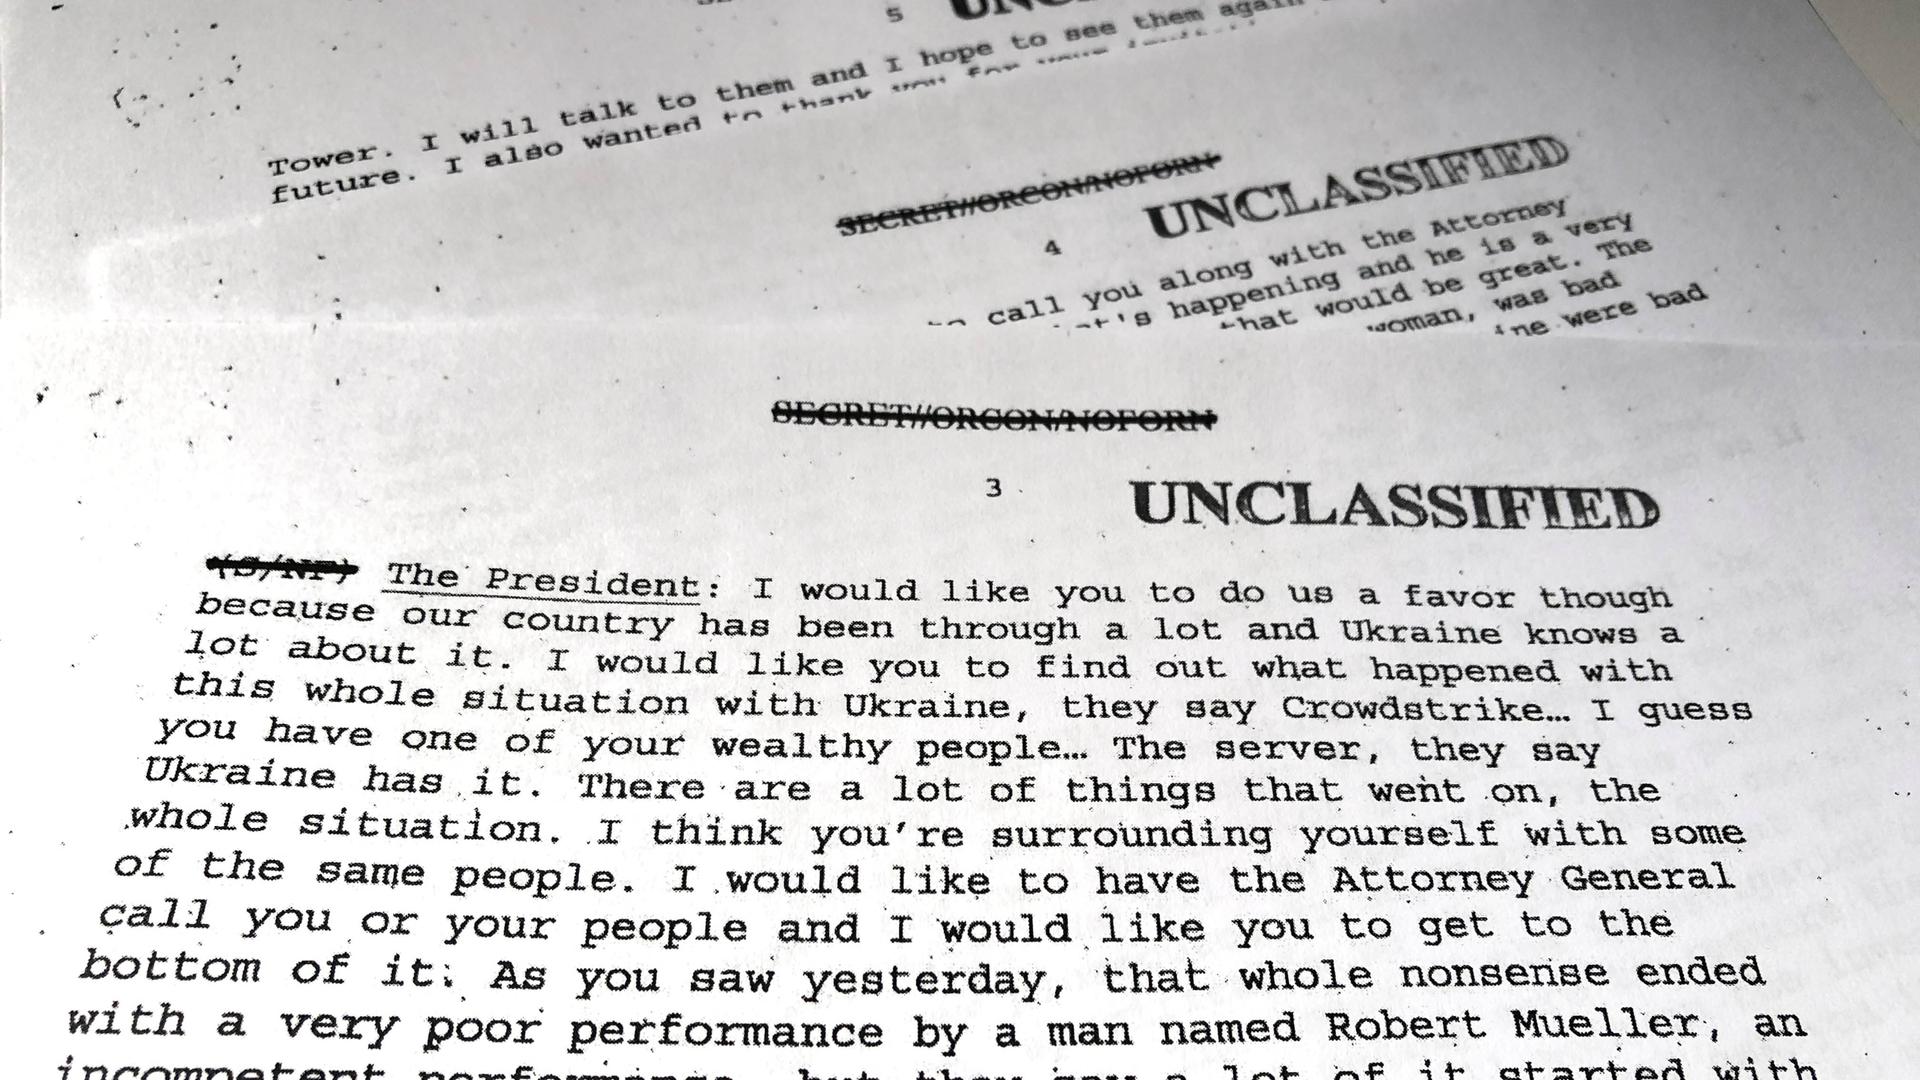 Unclassified papers